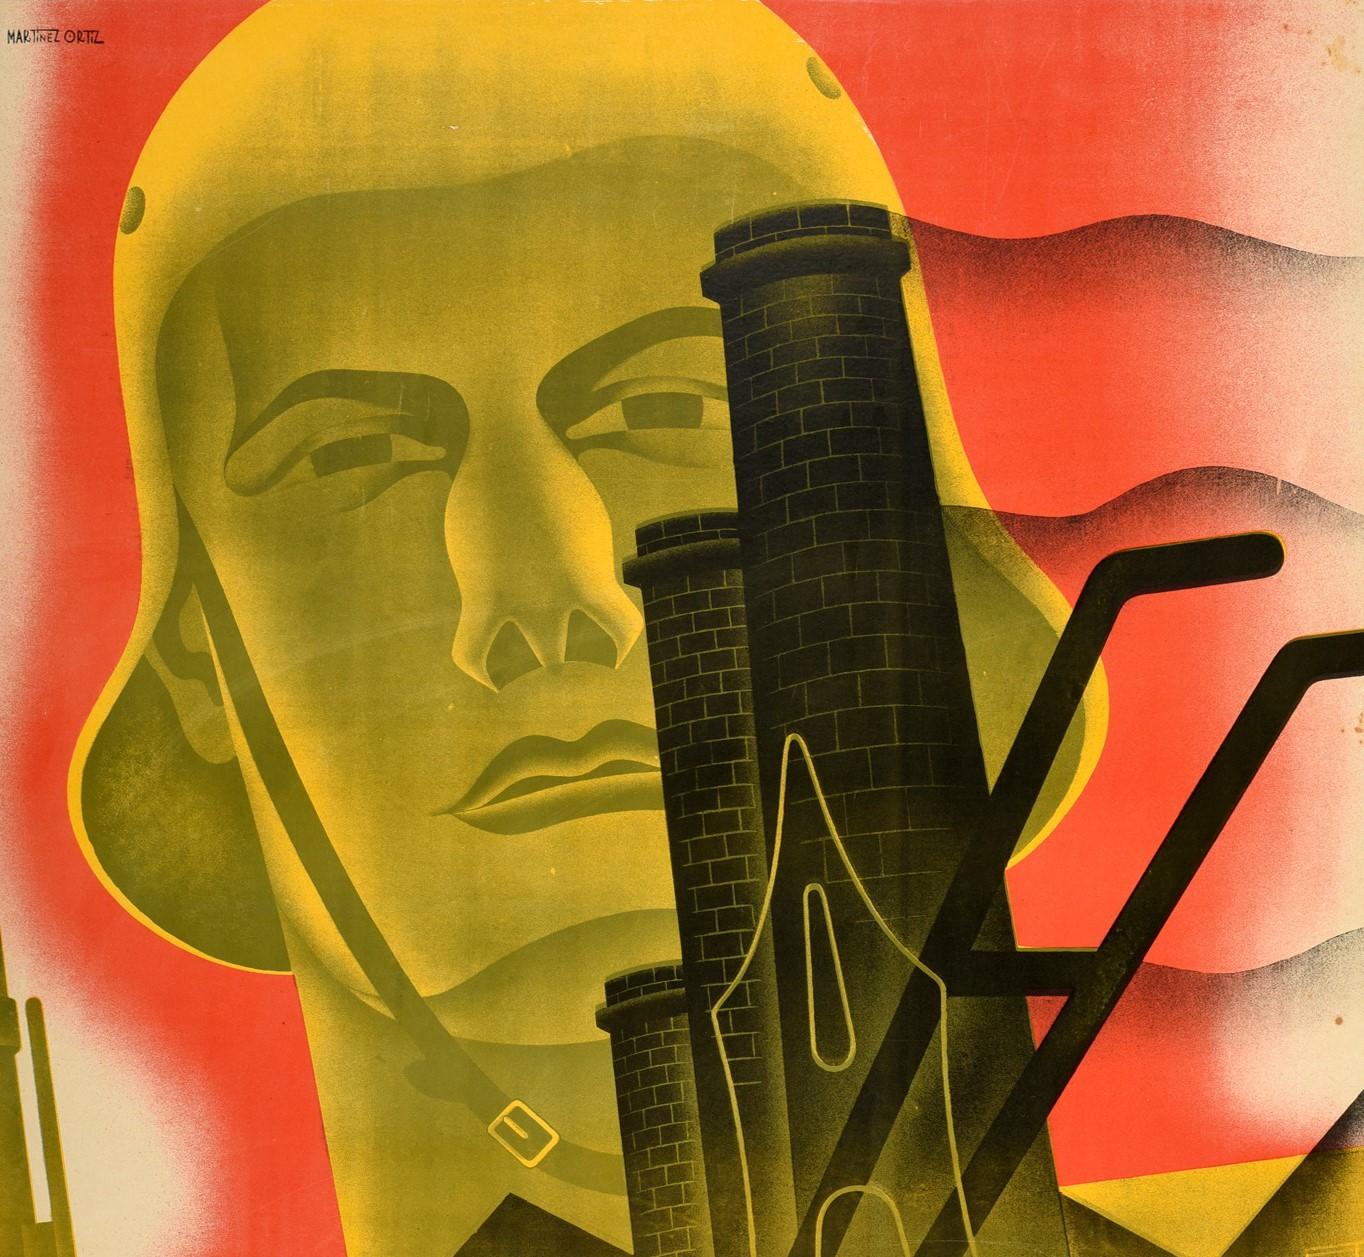 Original vintage Spanish Civil War propaganda poster - Disciplina / Discipline, featuring a great design by Nicolas Martinez Ortiz (1907-1990) depicting the face of a soldier wearing a helmet looming over an Industrial factory with dark brick